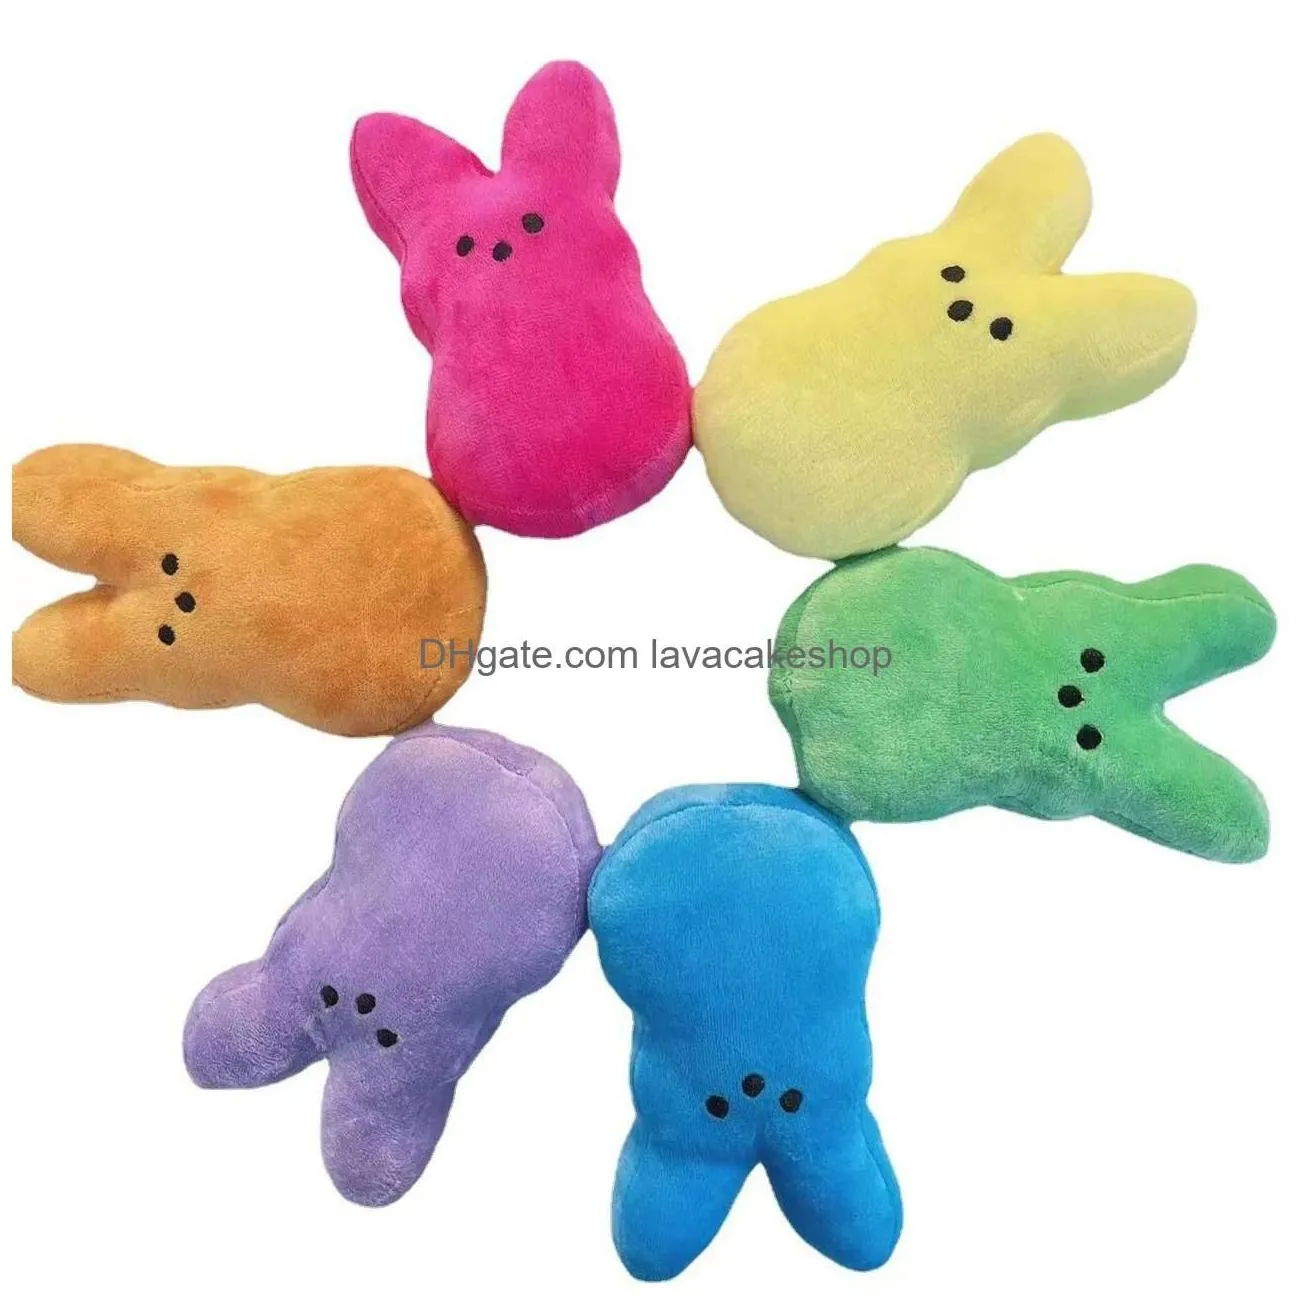 other festive party supplies 15cm mini easter bunny peeps plush doll pink blue yellow purple rabbit dolls for childrend cute soft toys